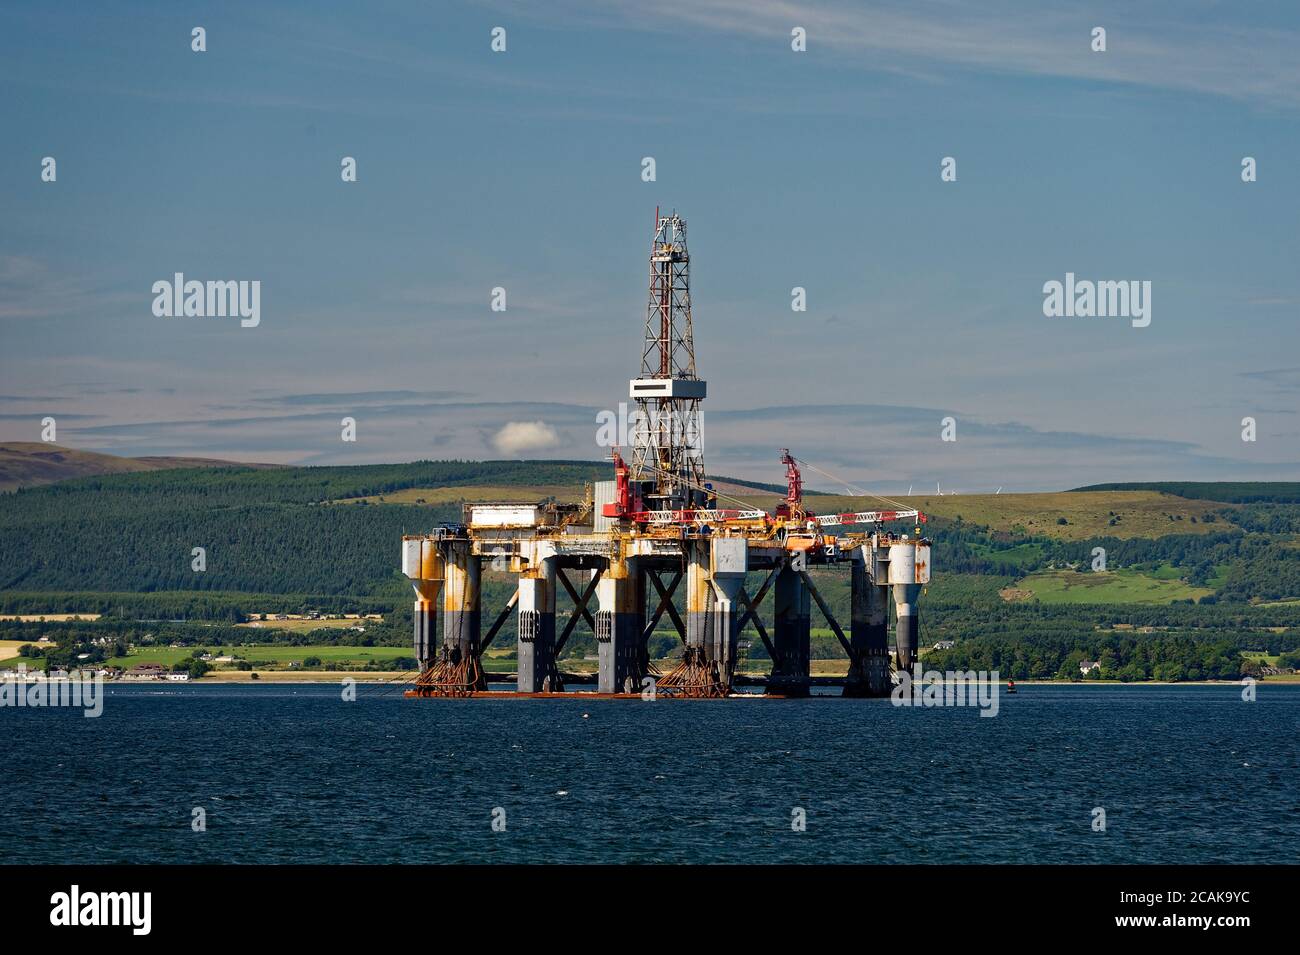 Oil Rigs in the Cromarty Firth, Highland, Scotland Stock Photo